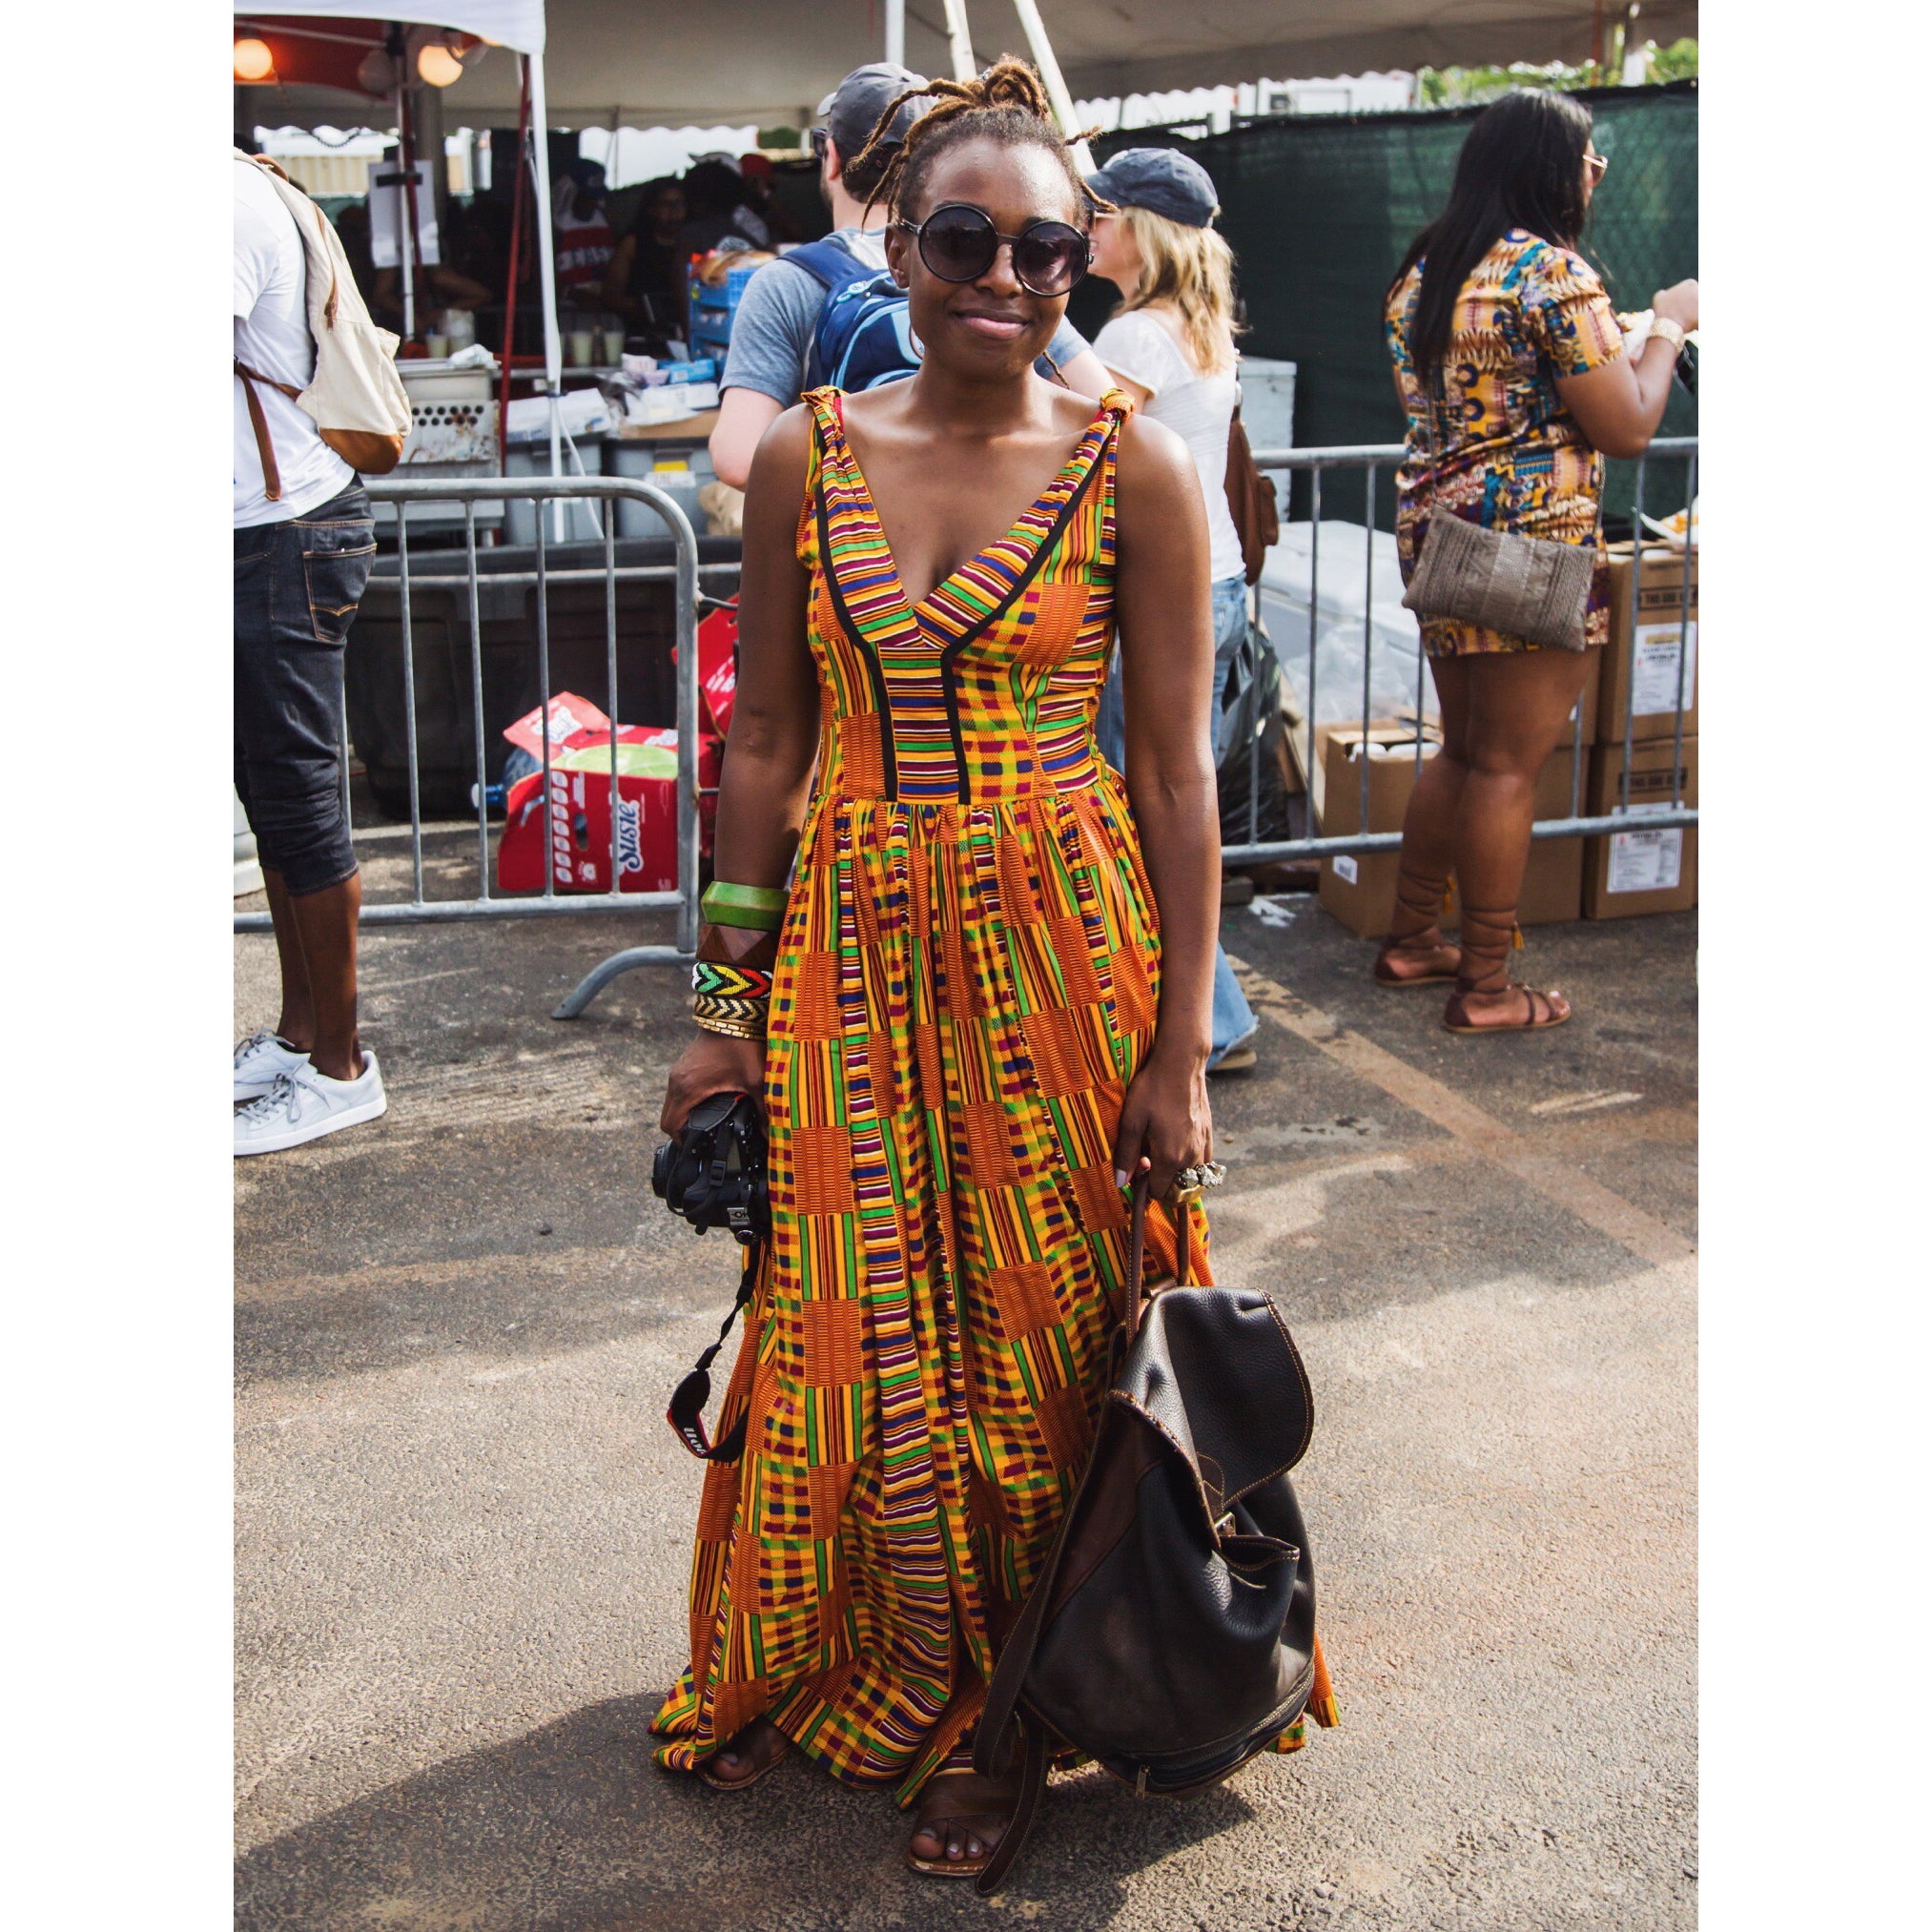 The Flyest Looks from The 2016 Roots Picnic
